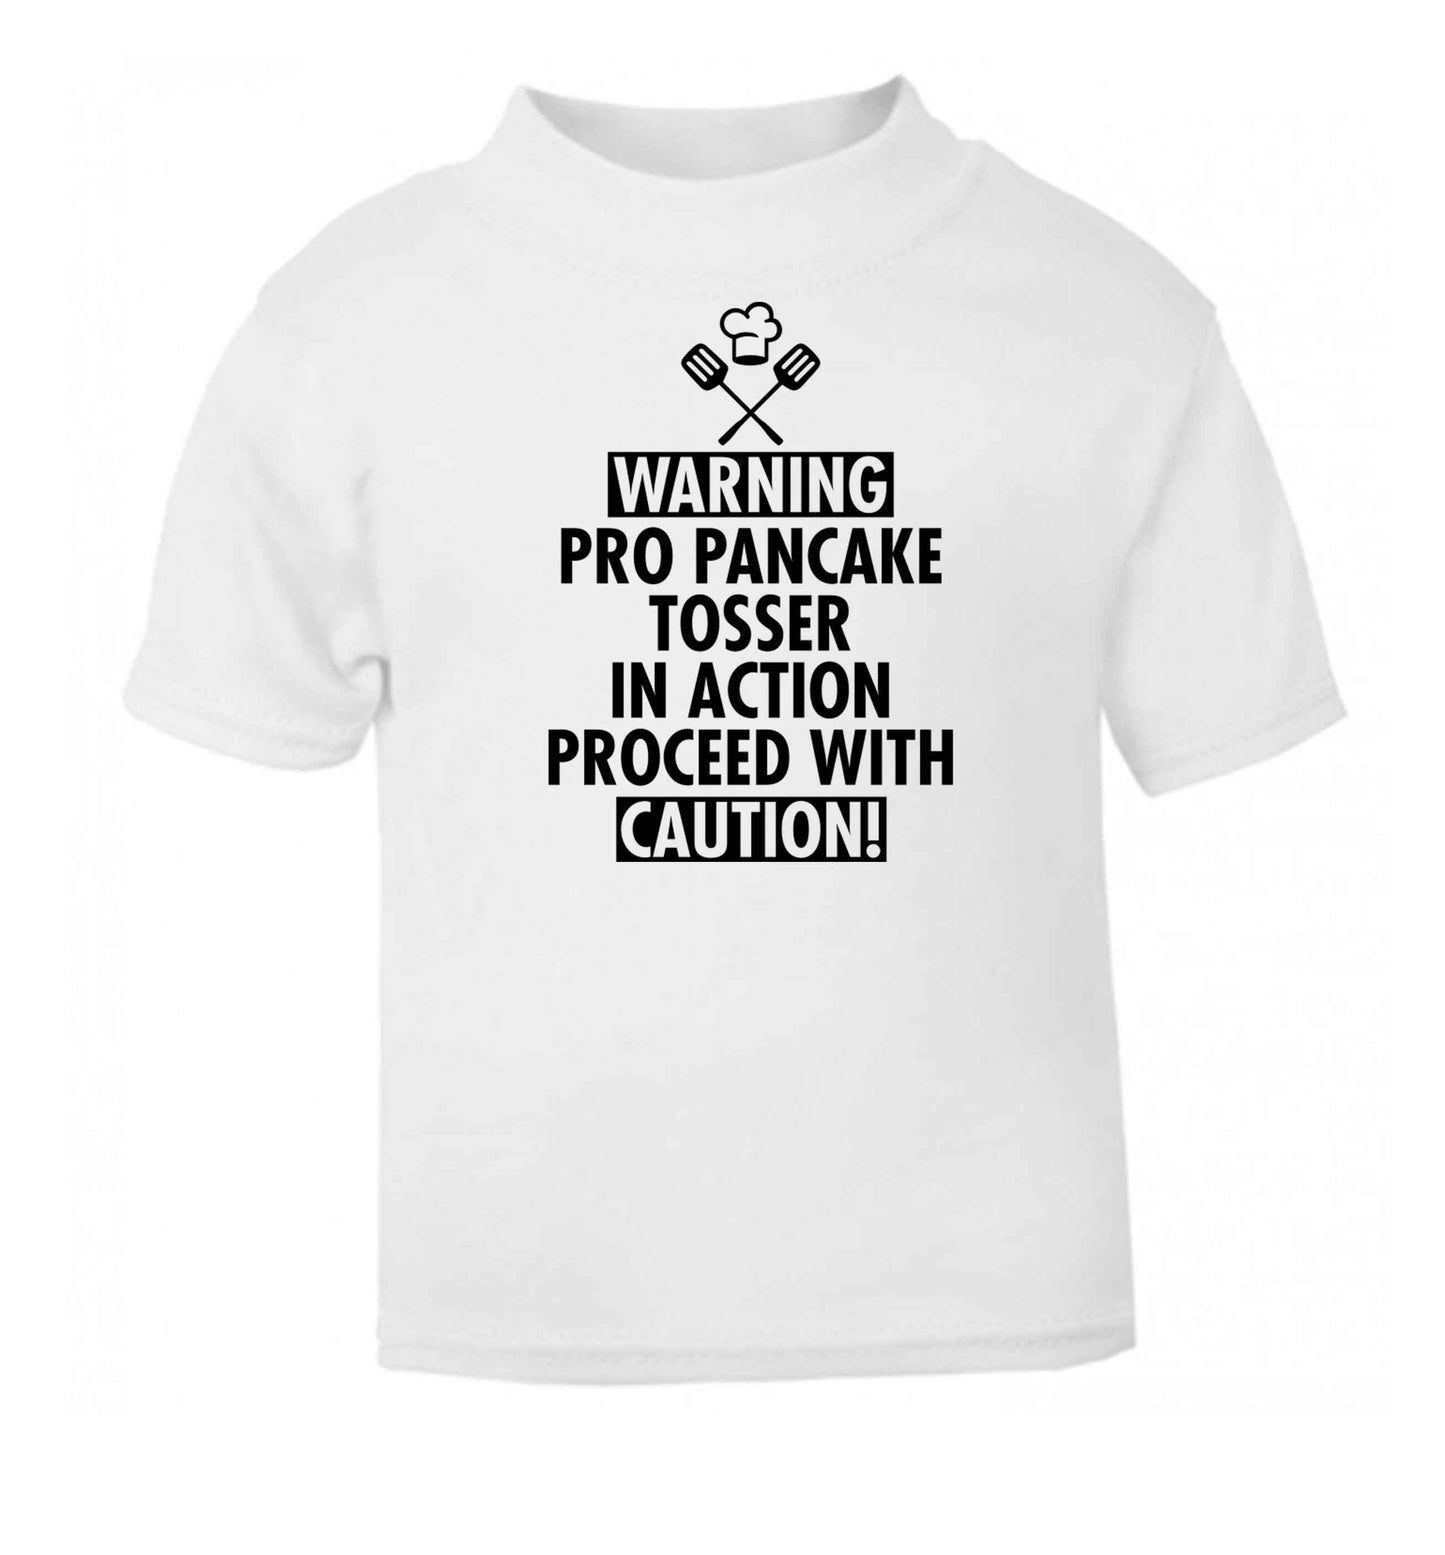 Warning pro pancake tosser in action proceed with caution white baby toddler Tshirt 2 Years